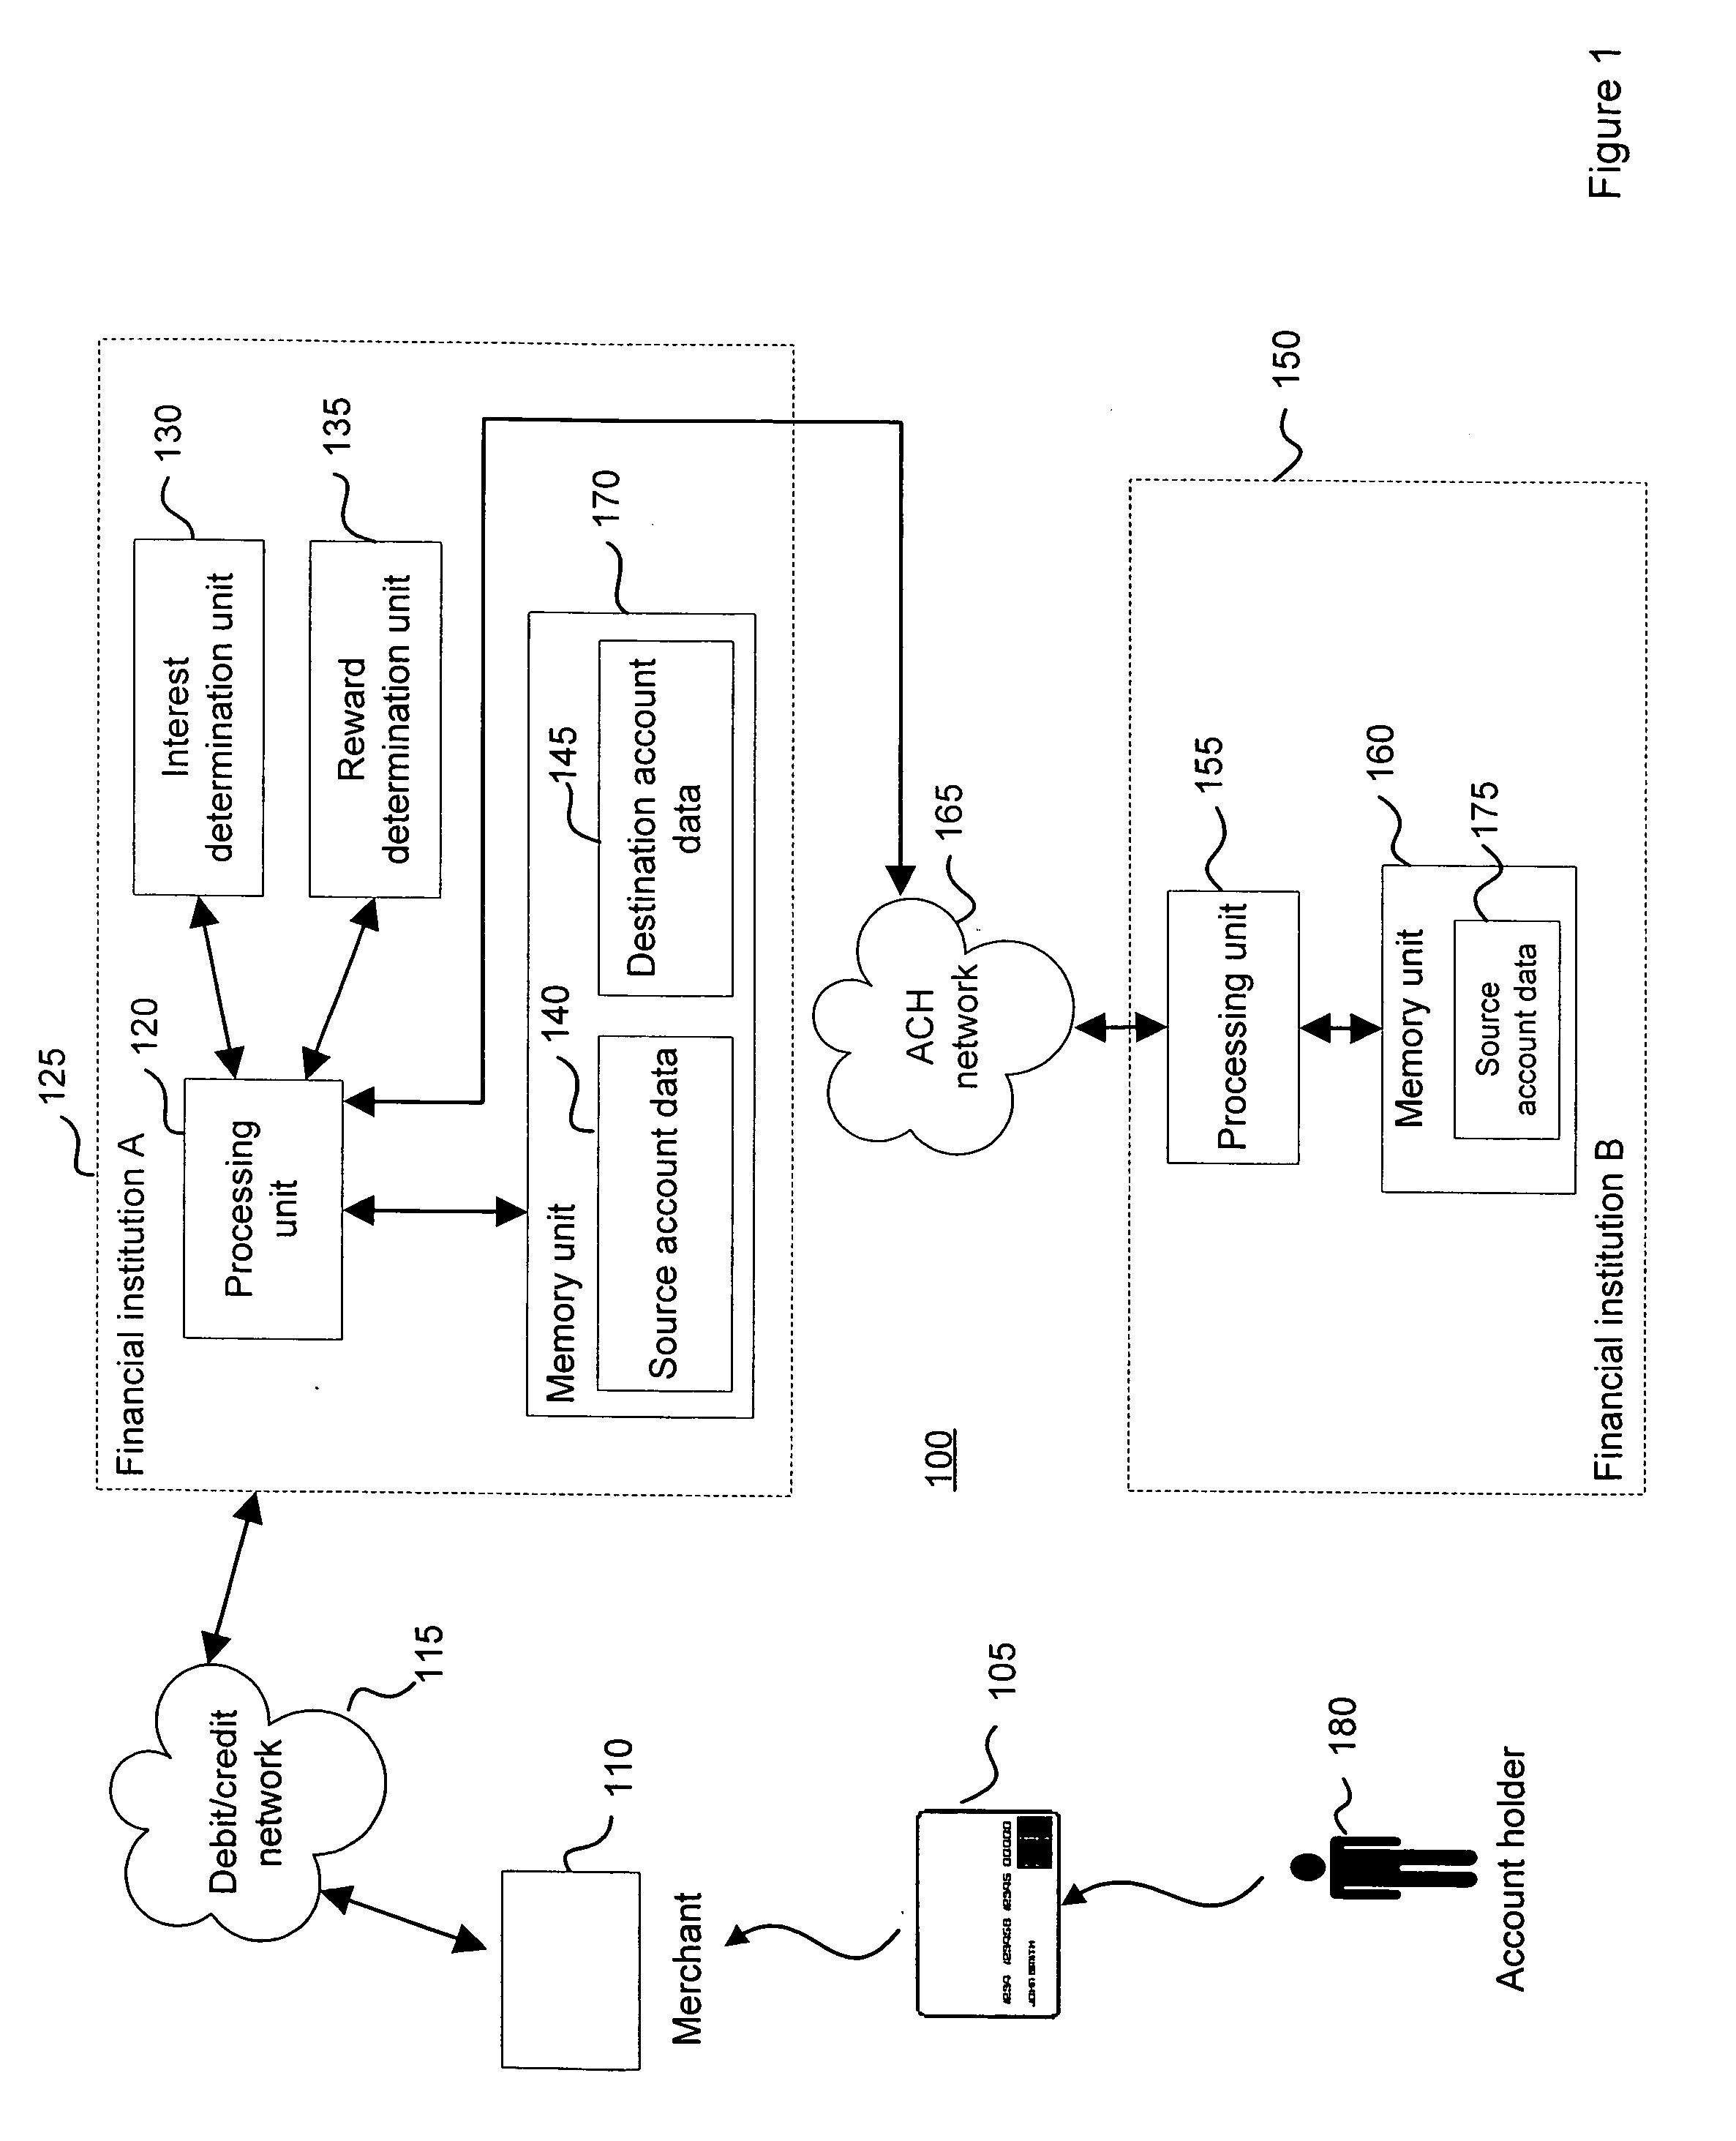 System and method for processing and for funding a transaction